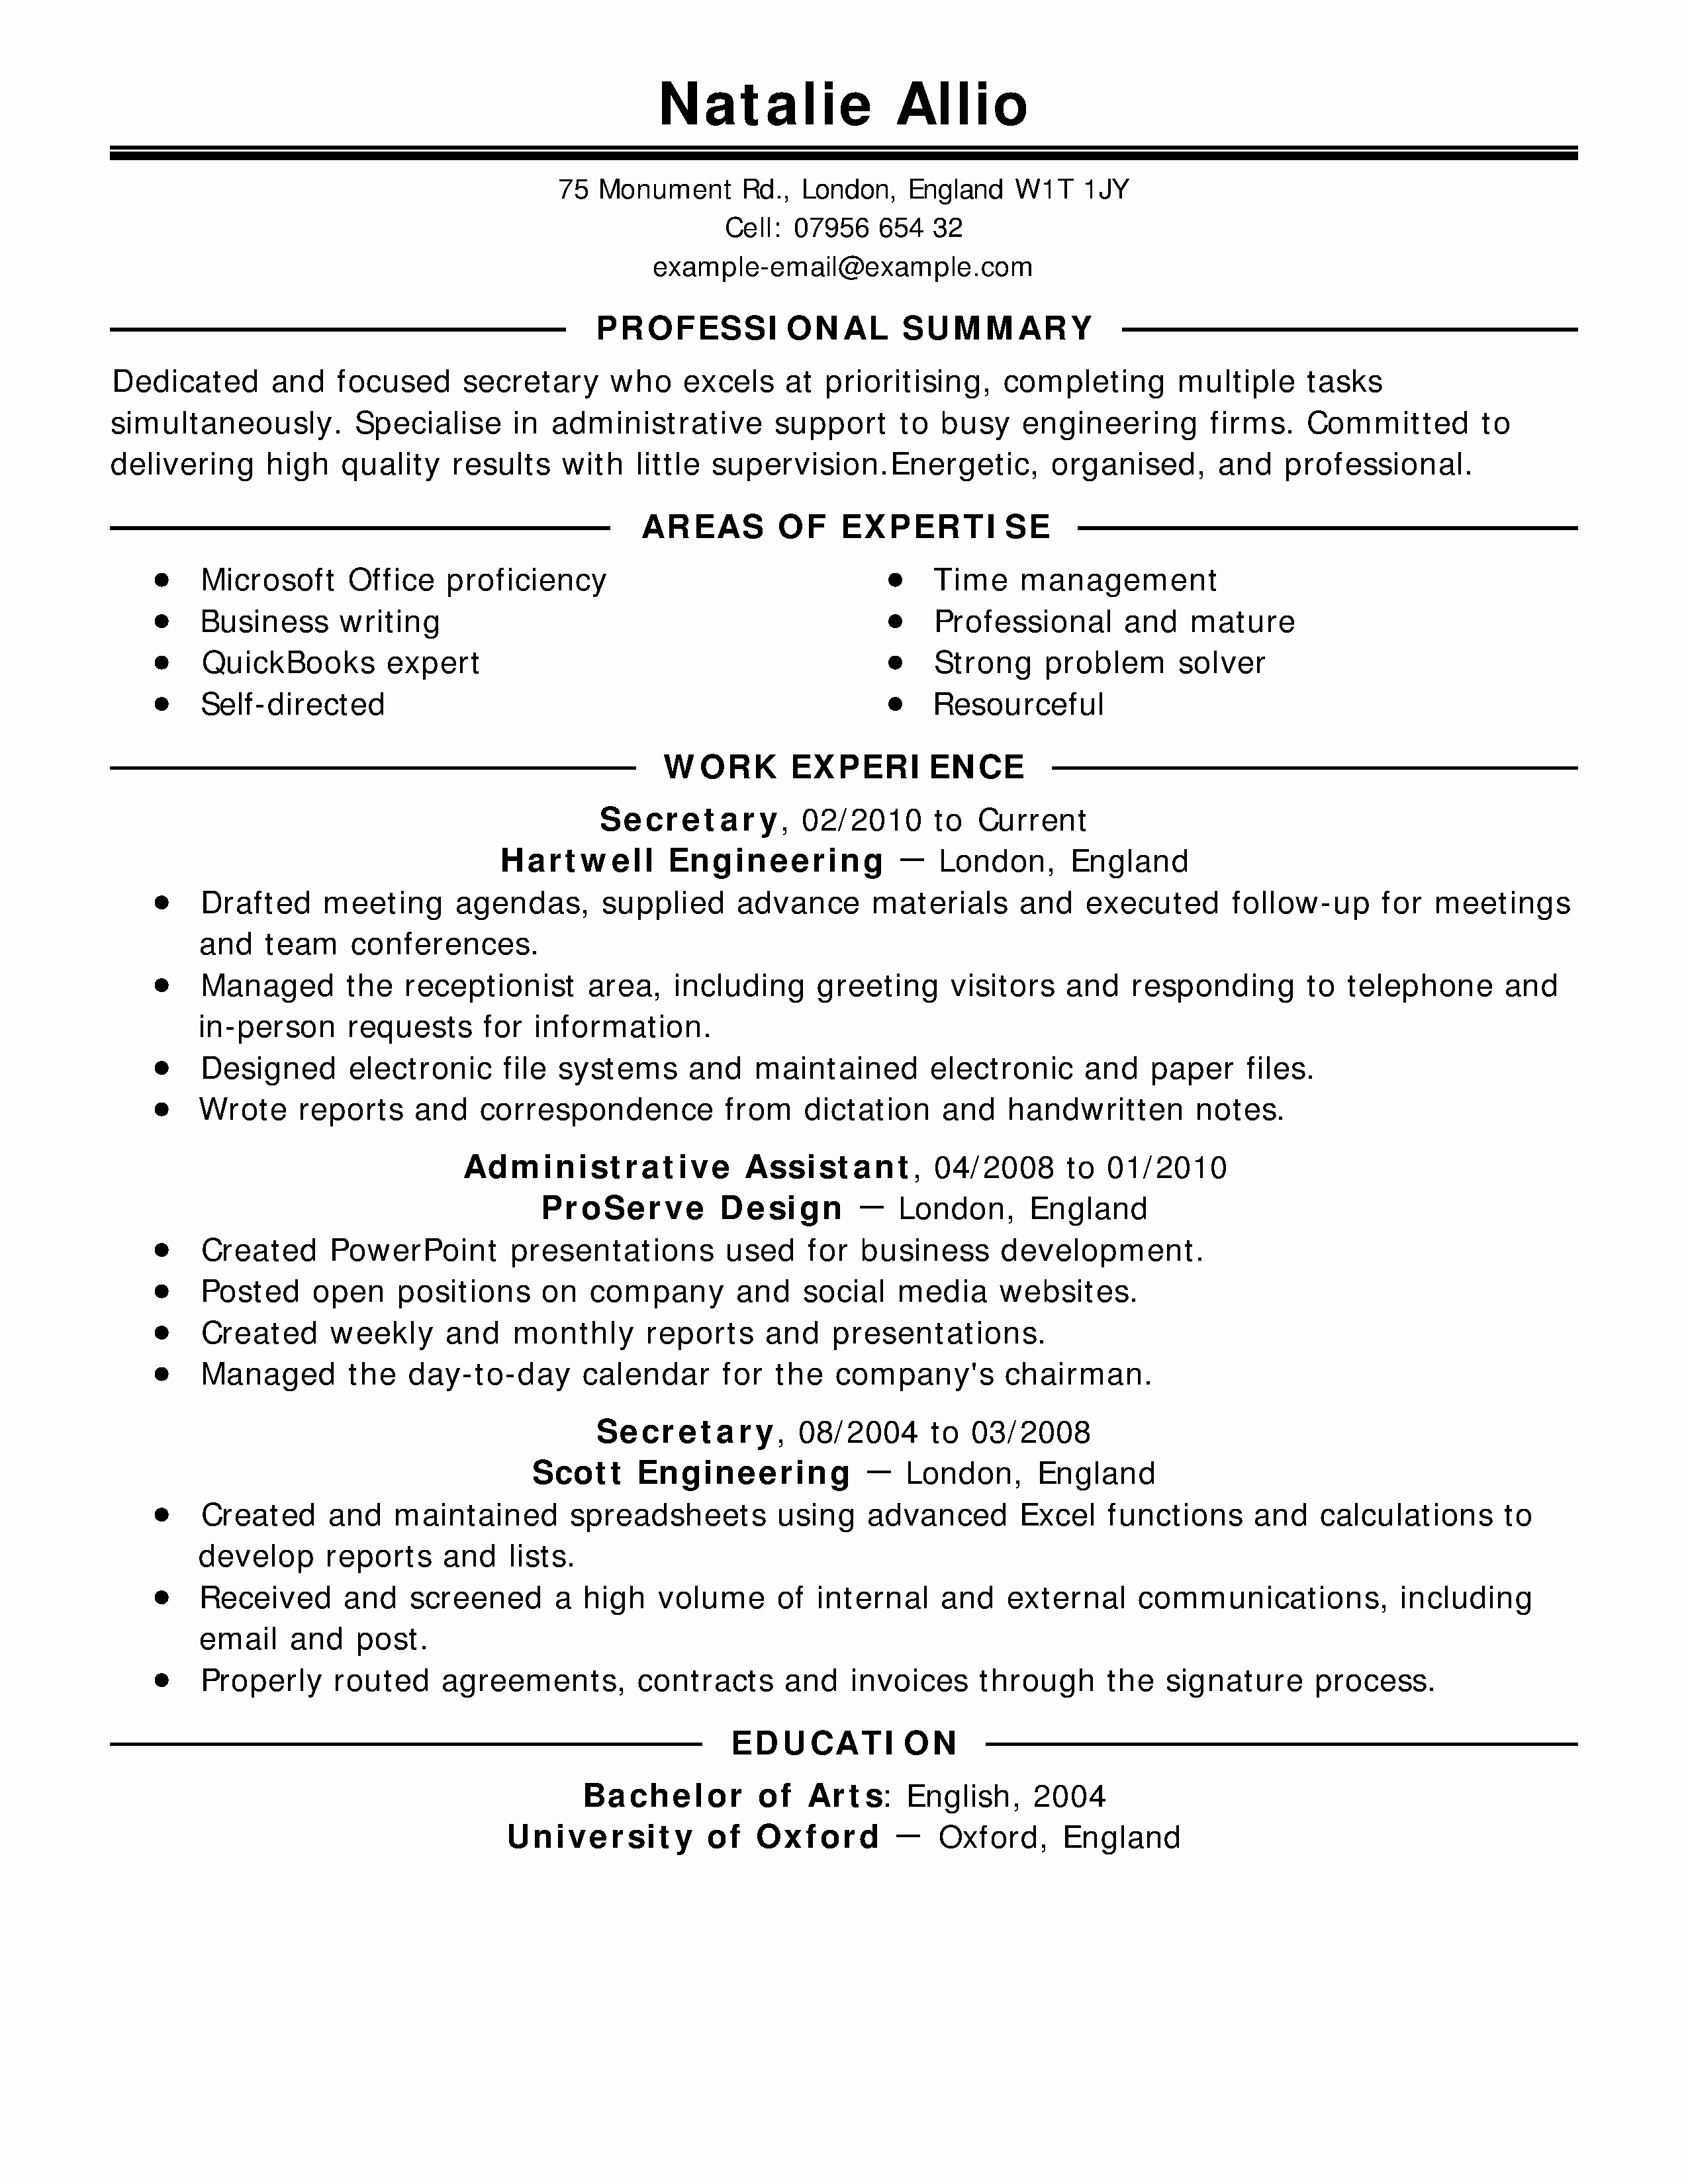 7 Outstanding Cover Letters &amp; Resumes for Internships